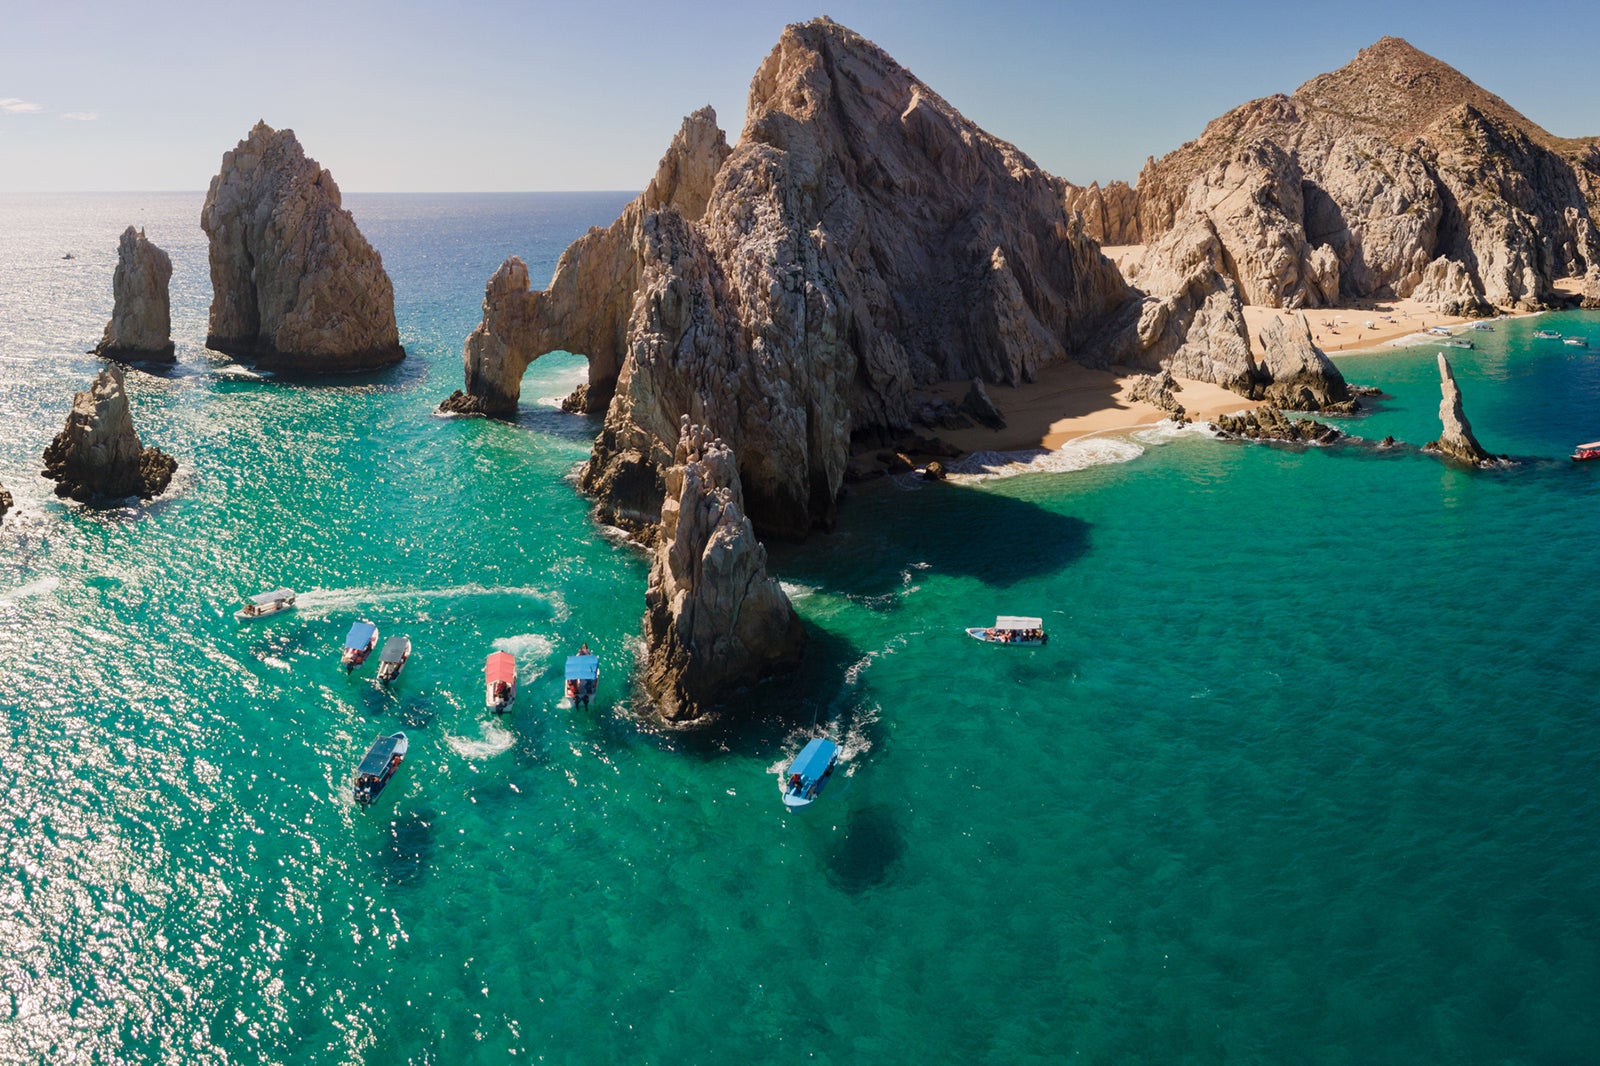 Downward Looking Aerial of the shallow water in Cabo San Lucas, Baja California Sur, Mexico near the Darwin Arch glass bottom boats viewing sealife